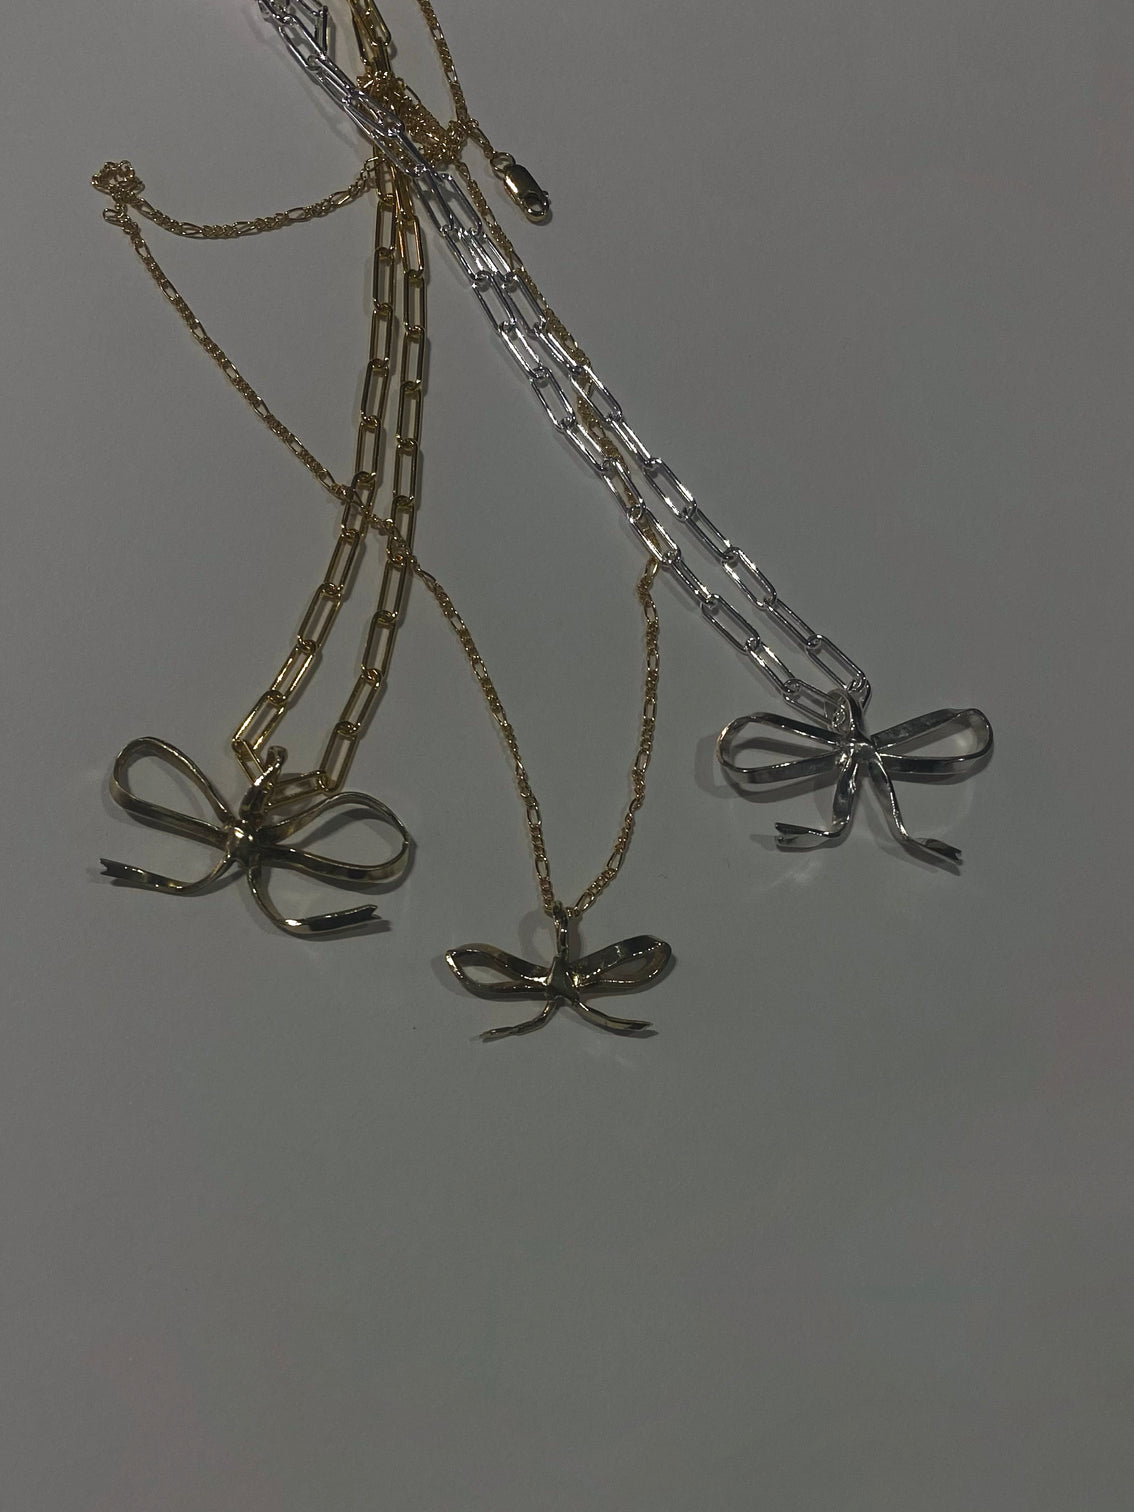 3 gold and silver bow pendant on chains, tangled on grey background